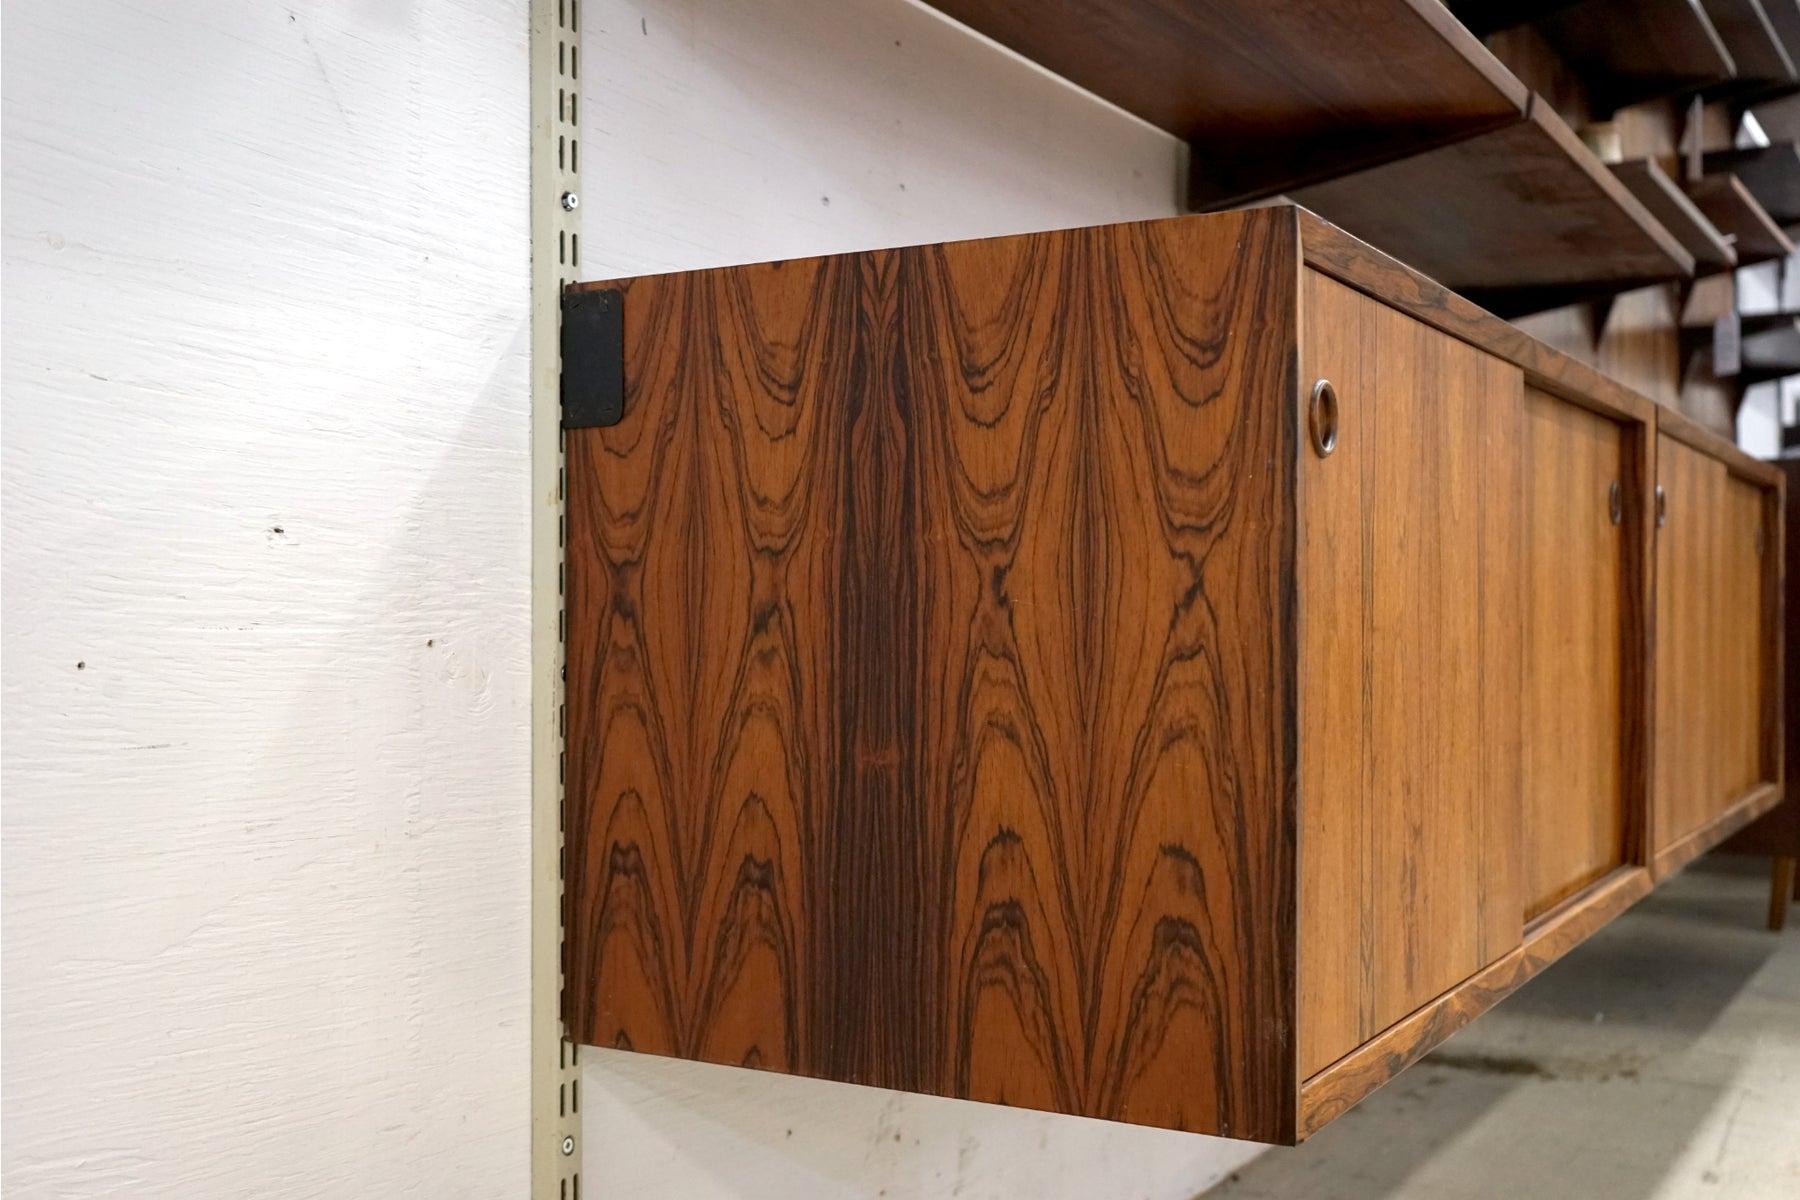 Rosewood wall system, circa 1960's. Modular cabinetry and shelving make this versatile wall system the perfect solution for home or office, wherever space is limited but function is a high priority. This fantastic wall system features solid wood